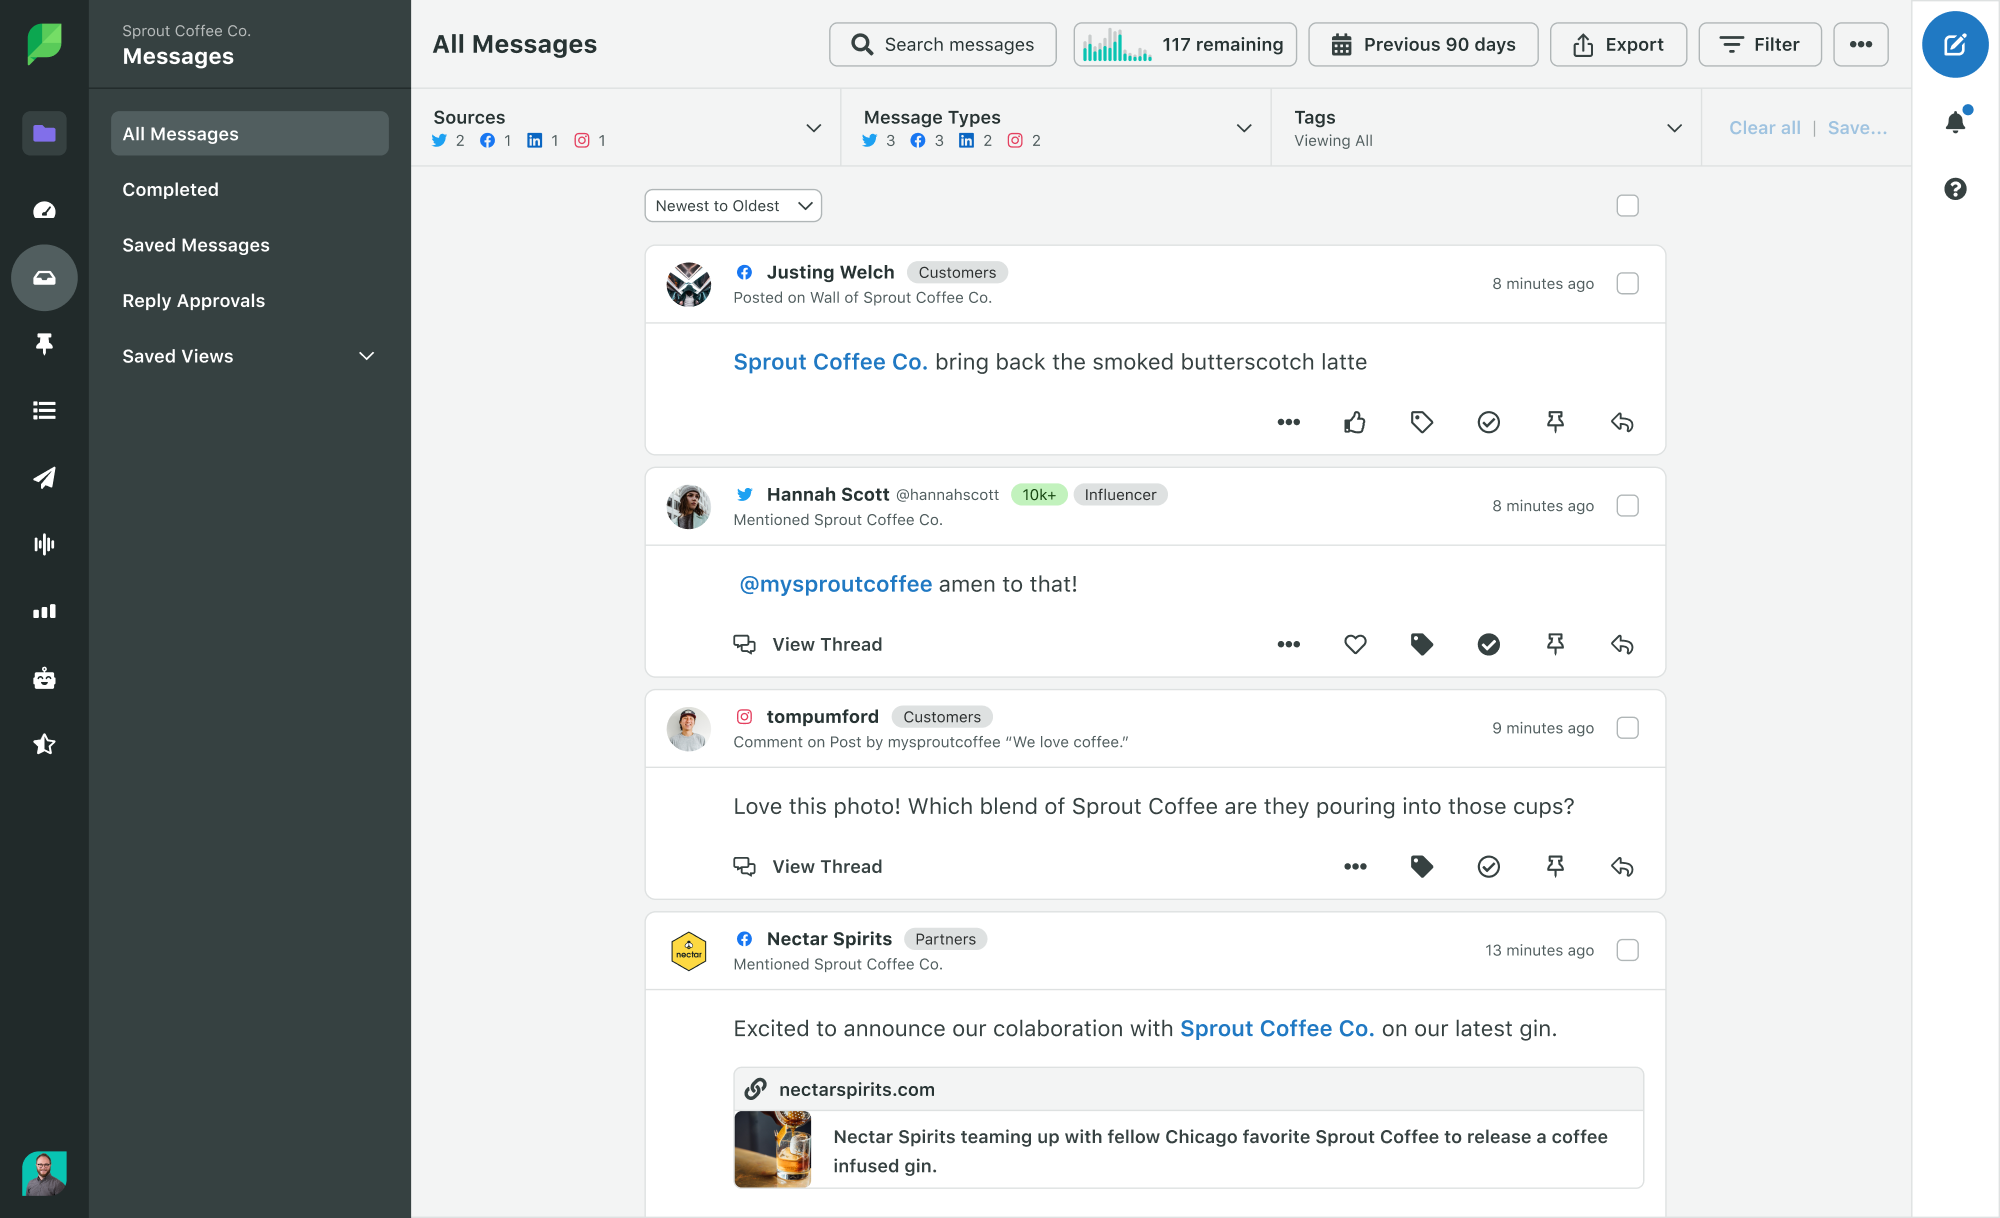 sprout smart inbox showing all messages in one place